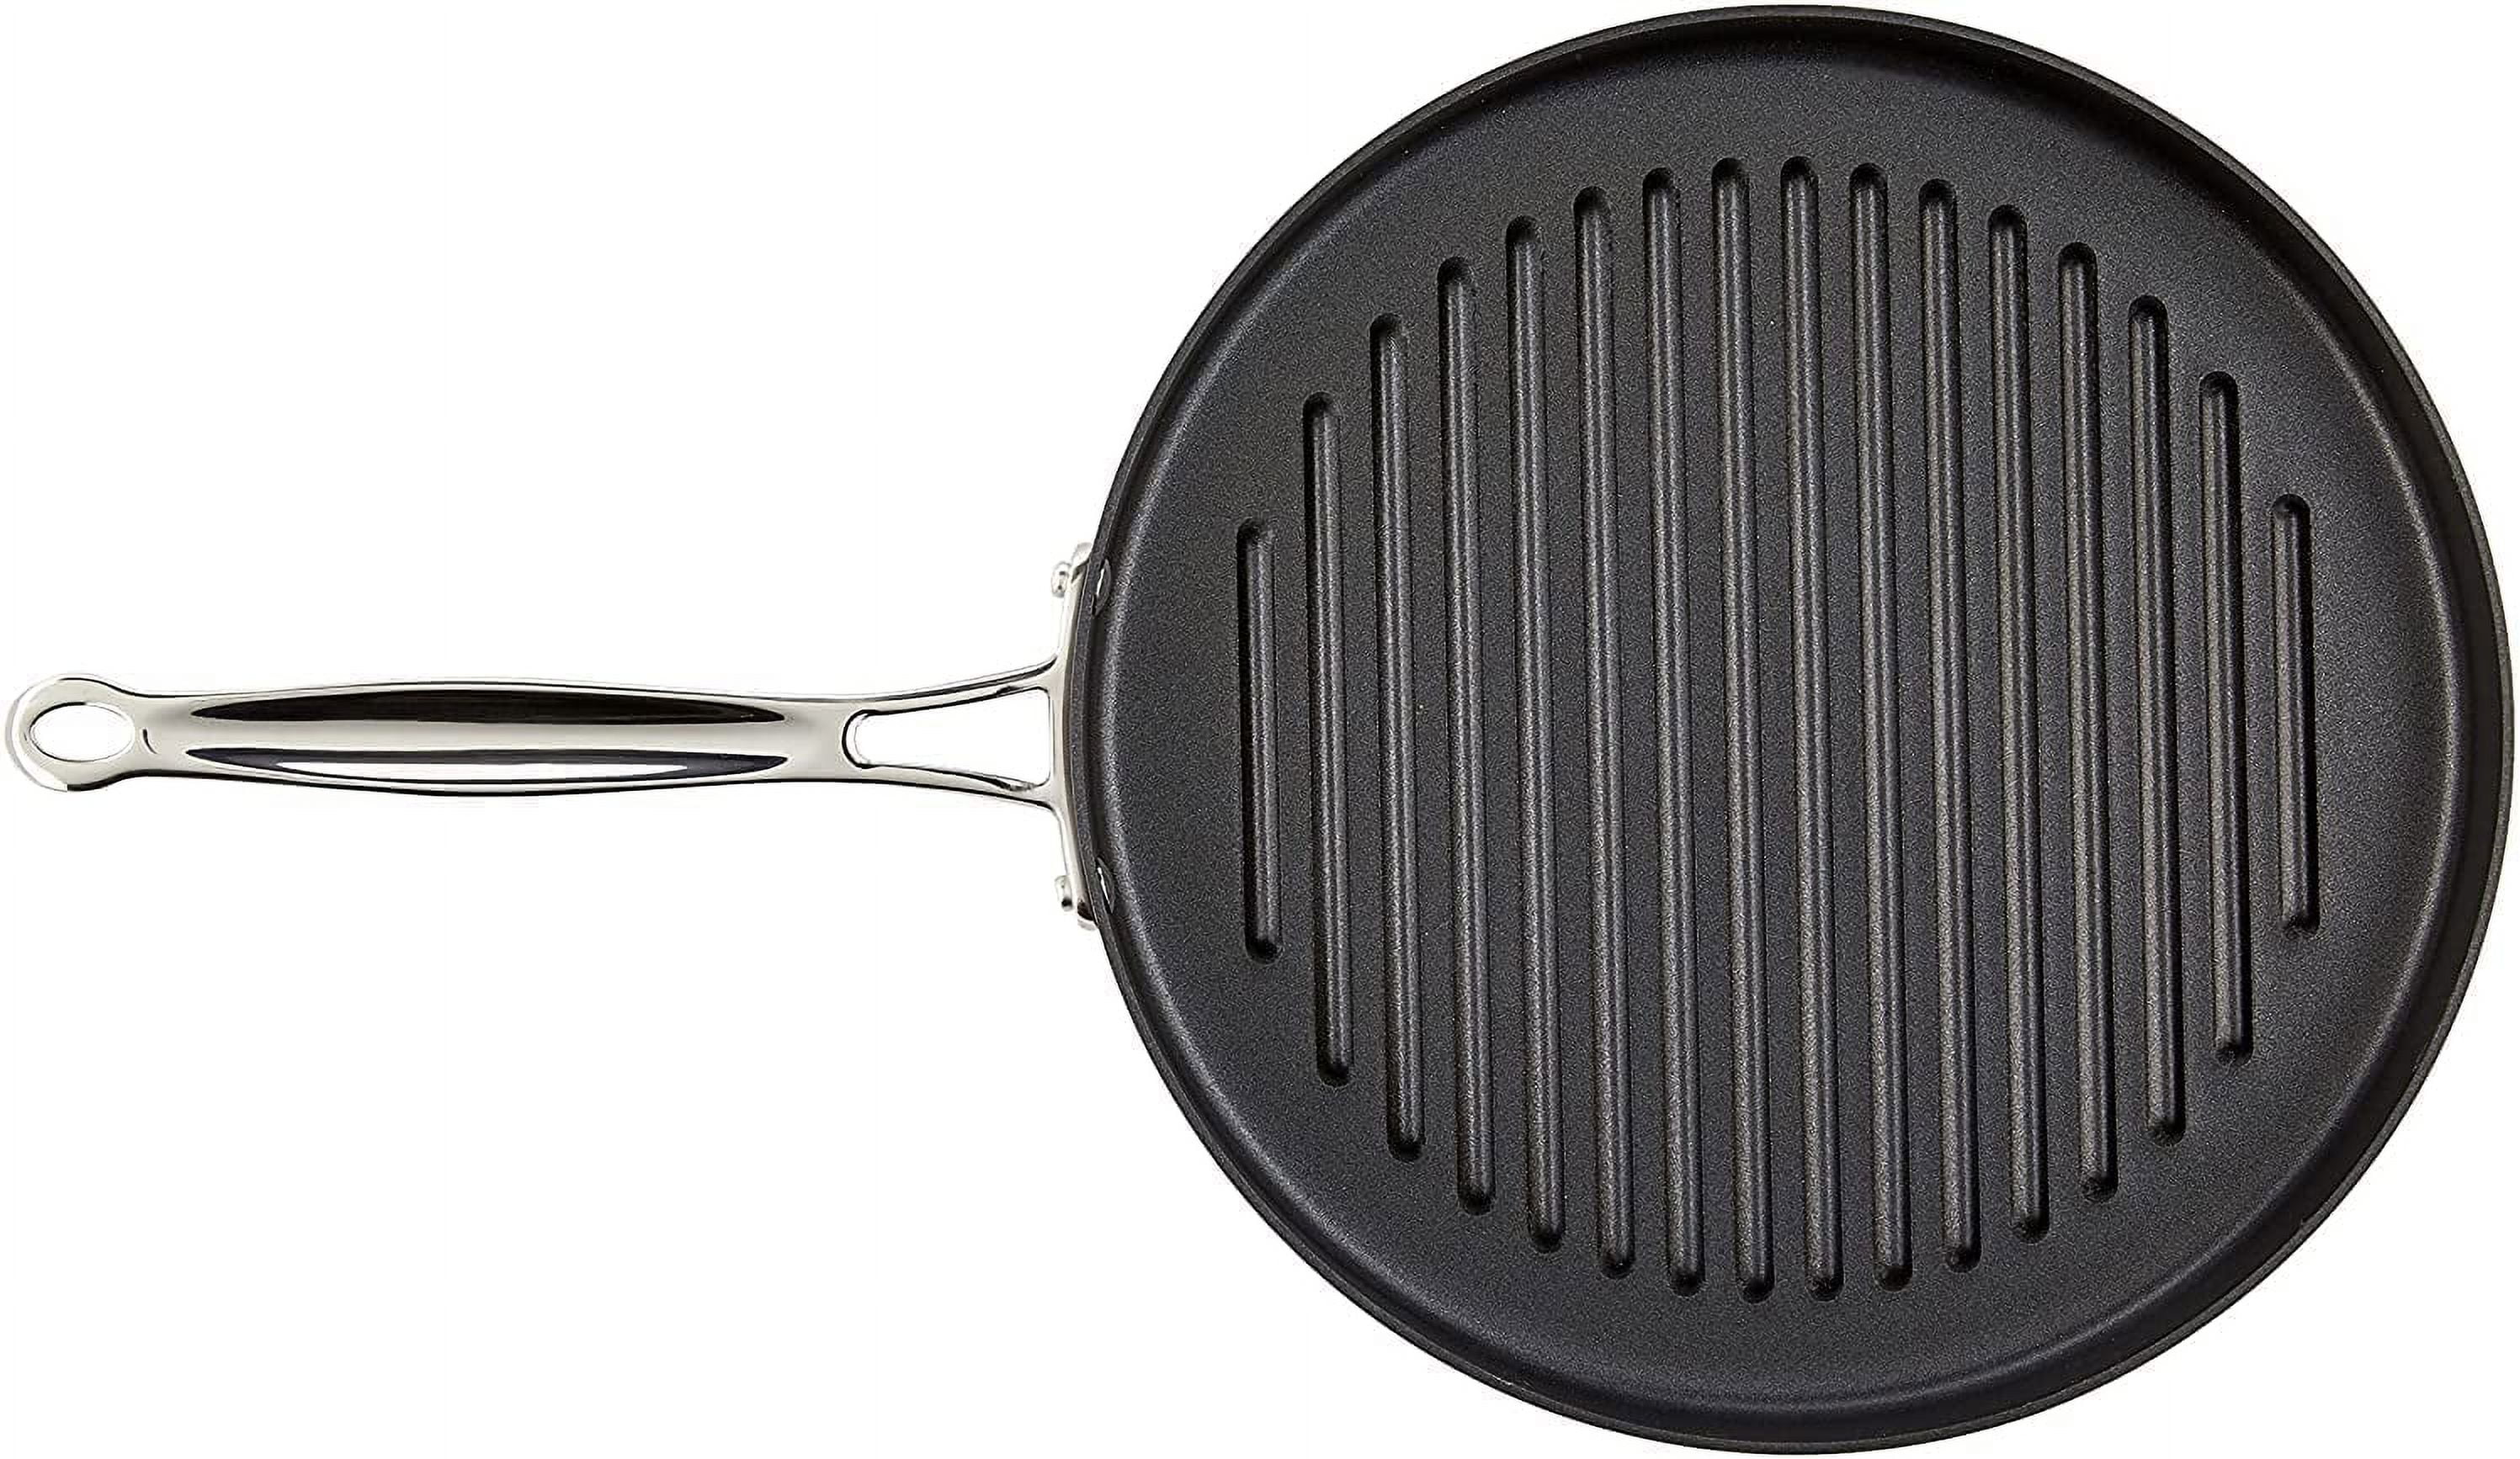 Sempoda Grill Pan Round Griddle Pan, Professional Nonstick Frying Pan for  Breakfast, Breakfast Grill Pan for Stove Top, Stainless Steel Universal